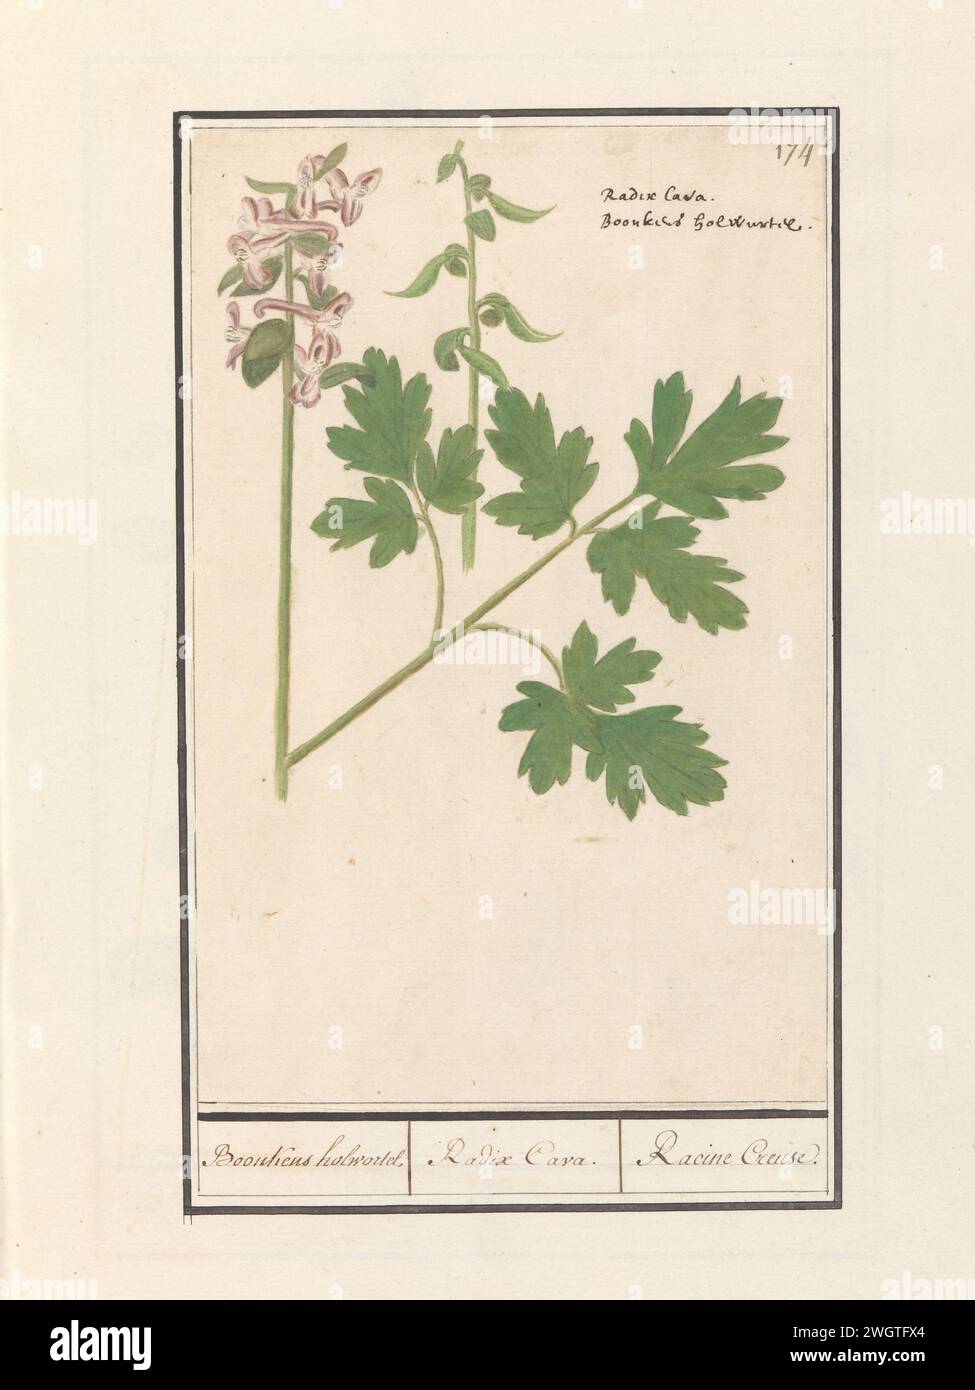 Holwortel (Corydalis cava), Anselm Boëtius de Boodt, 1596 - 1610 drawing Hol root. Numbered at the top right: 174. At the top right the name in Latin and Dutch. Part of the second album with drawings of flowers and plants. Ninth of twelve albums with drawings of animals, birds and plants known around 1600, made commissioned by Emperor Rudolf II. With explanation in Dutch, Latin and French. draughtsman: Praagdraughtsman: Delft paper. watercolor (paint). deck paint. chalk. ink brush / pen flowers: corydalis Stock Photo